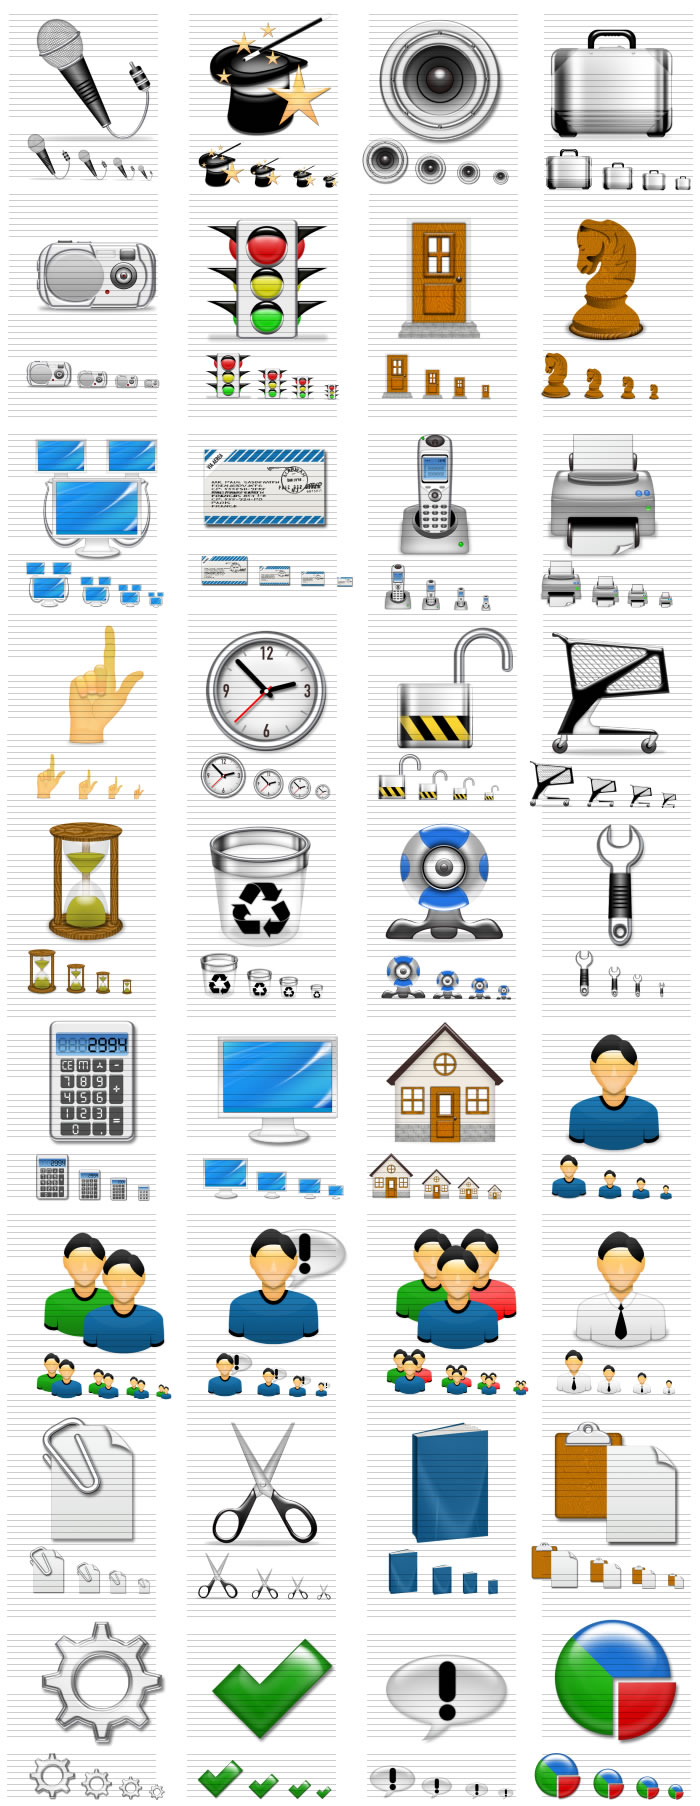 Iconshock Impressions Professional icons for your software and web